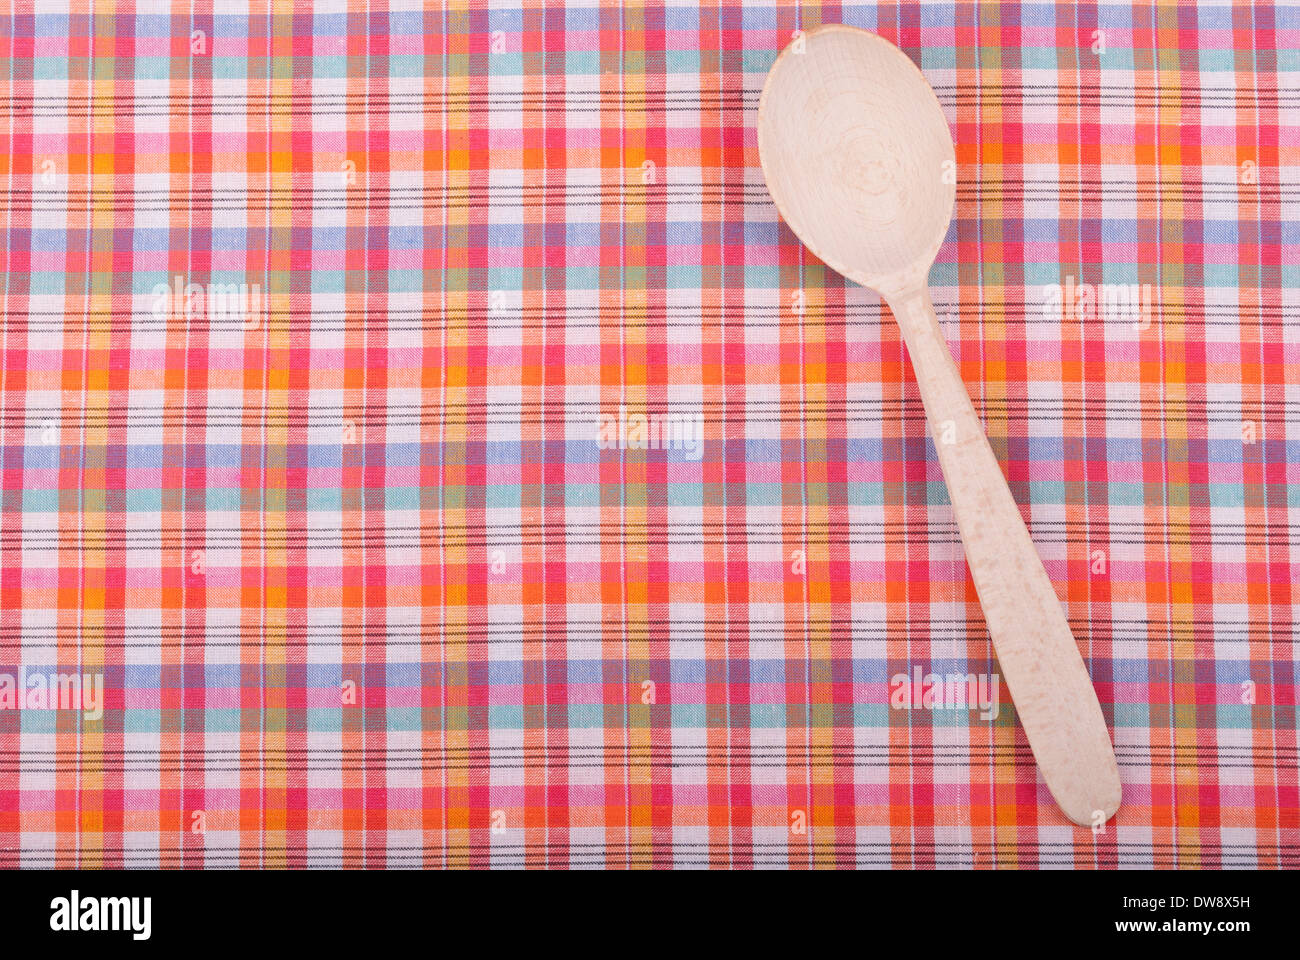 Wooden spoon on checkered tablecloth. Stock Photo